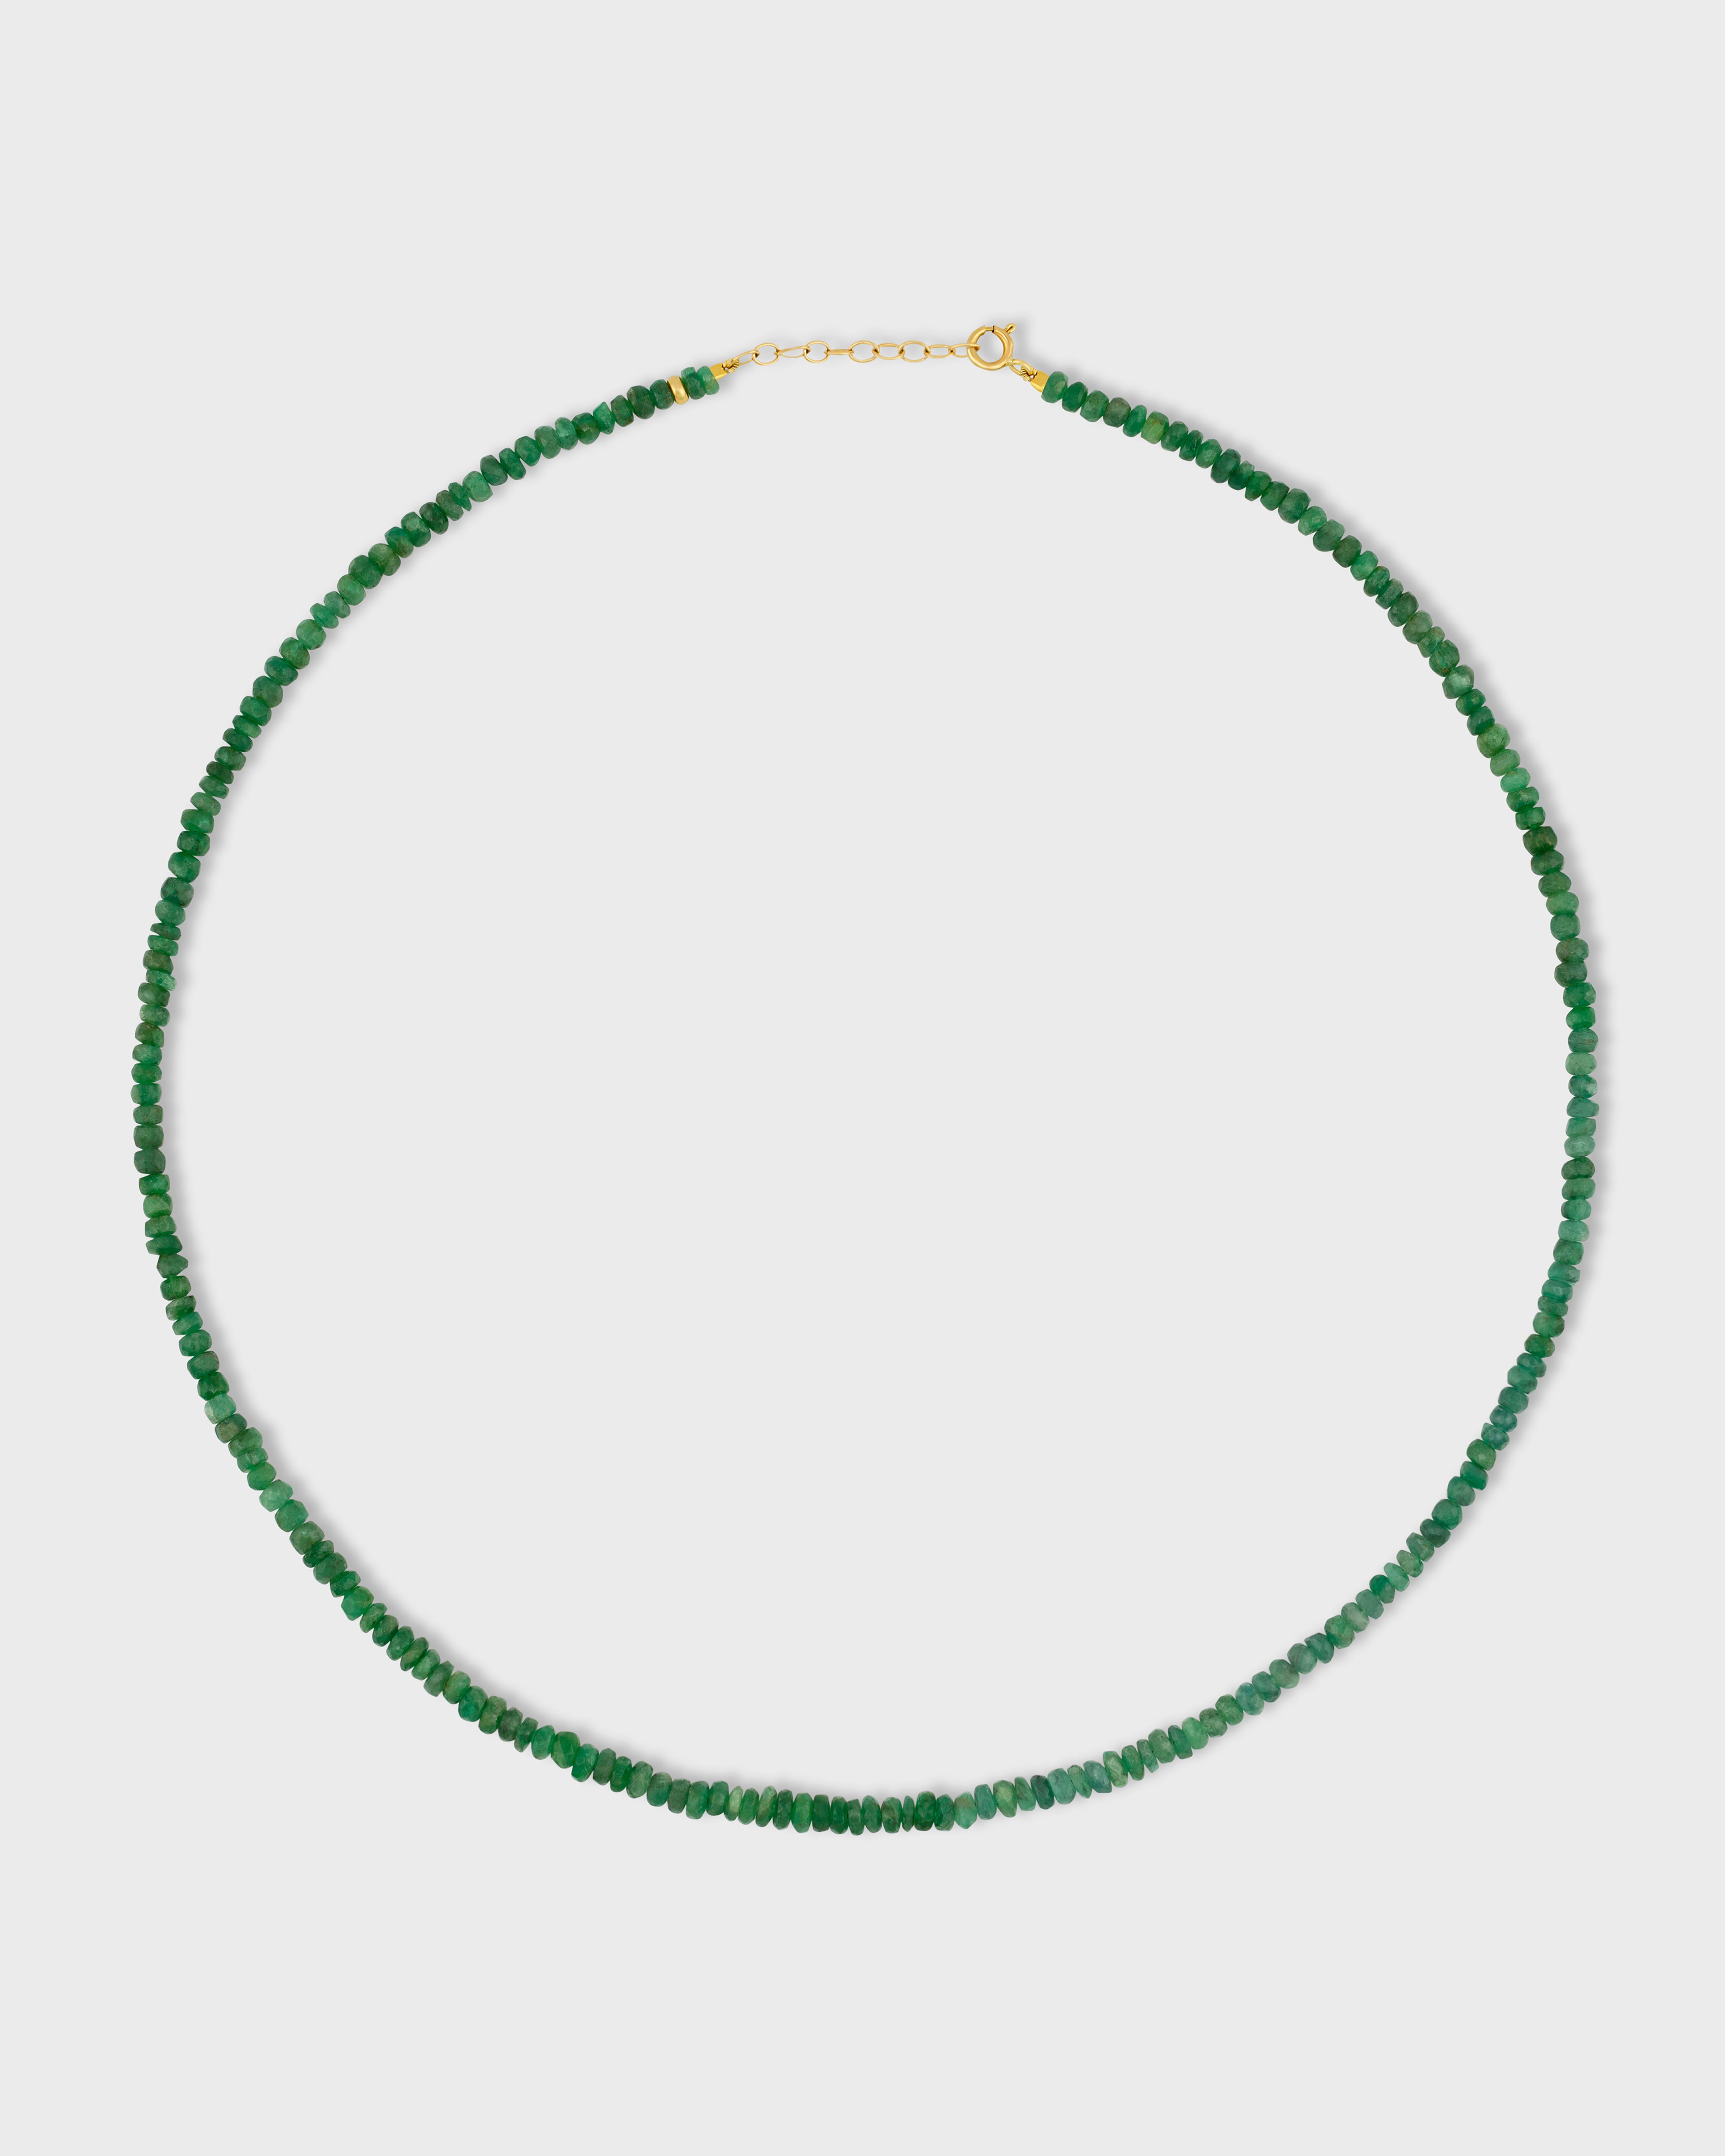 Birthstone May Emerald Beaded Necklace